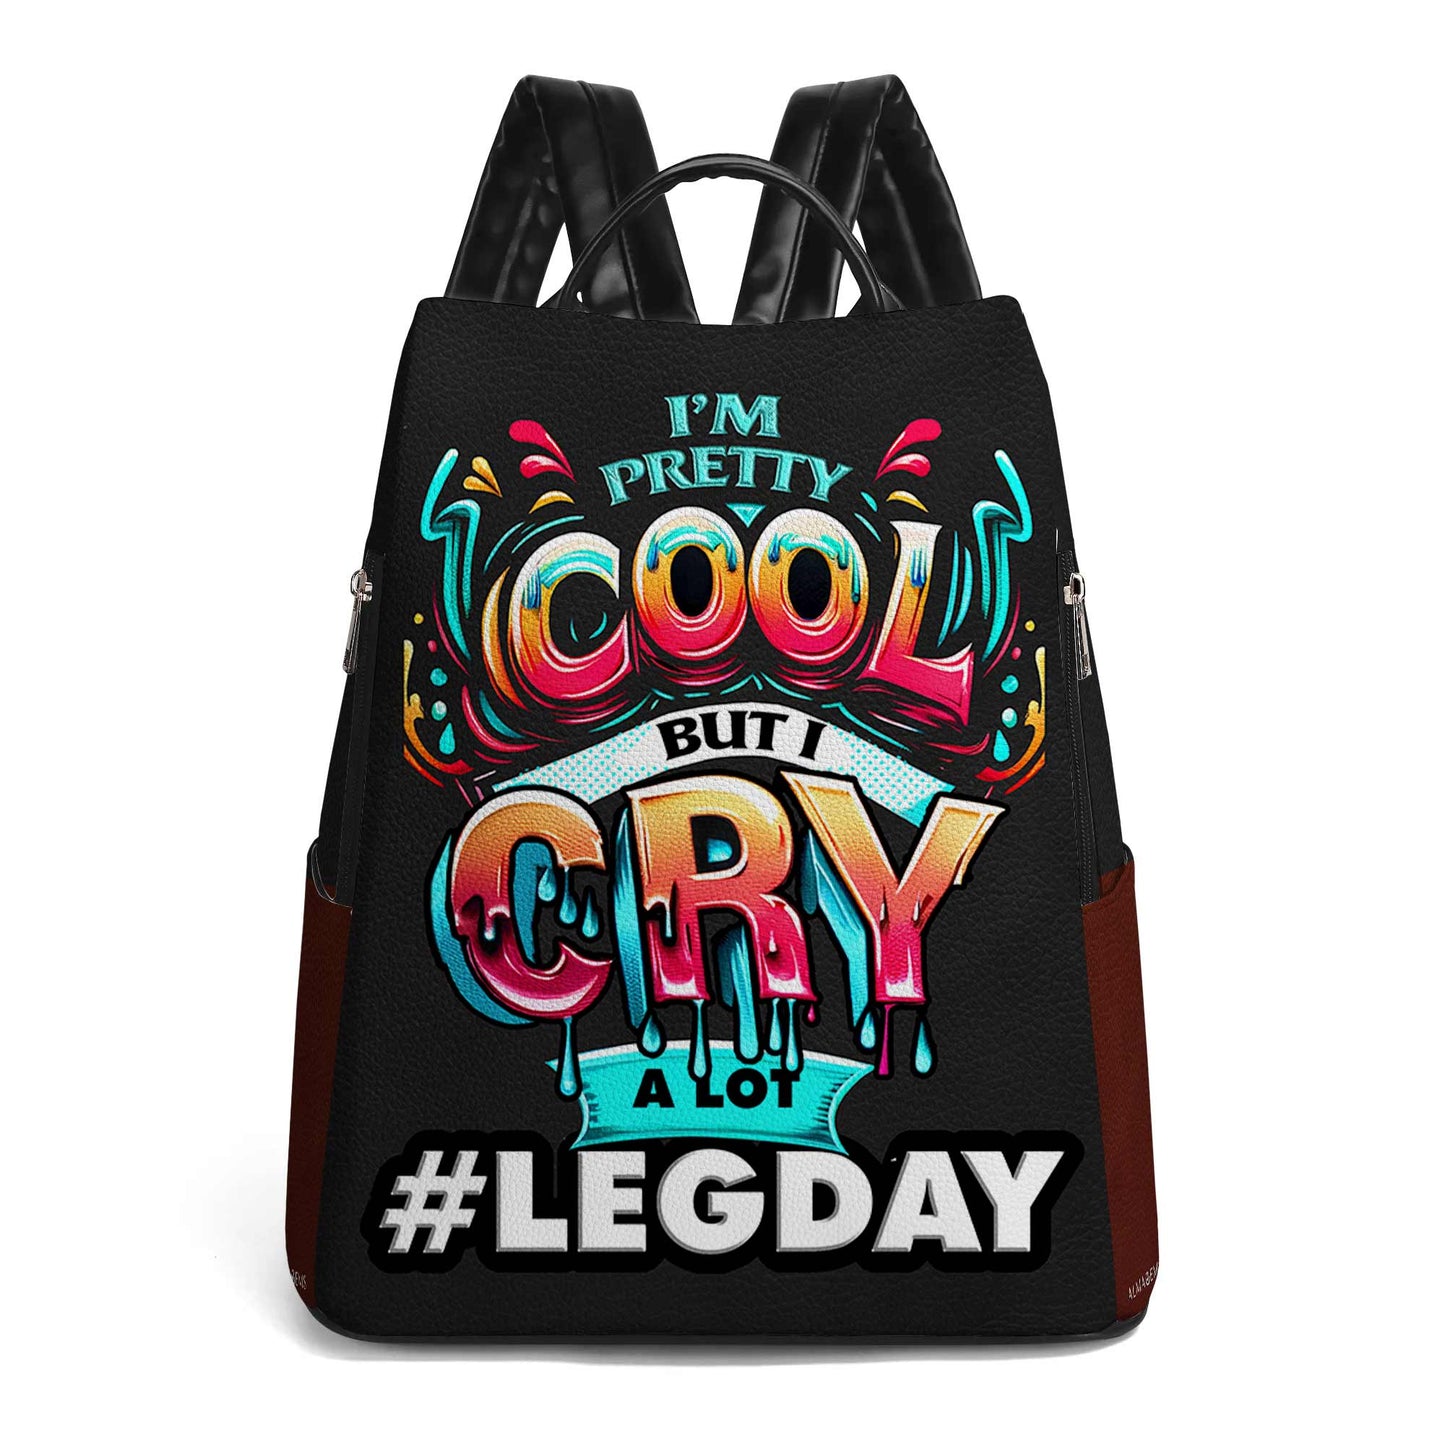 I'm Pretty Cool, But I Cry A Lot - Personalized Leather BackPack - BP_FN15